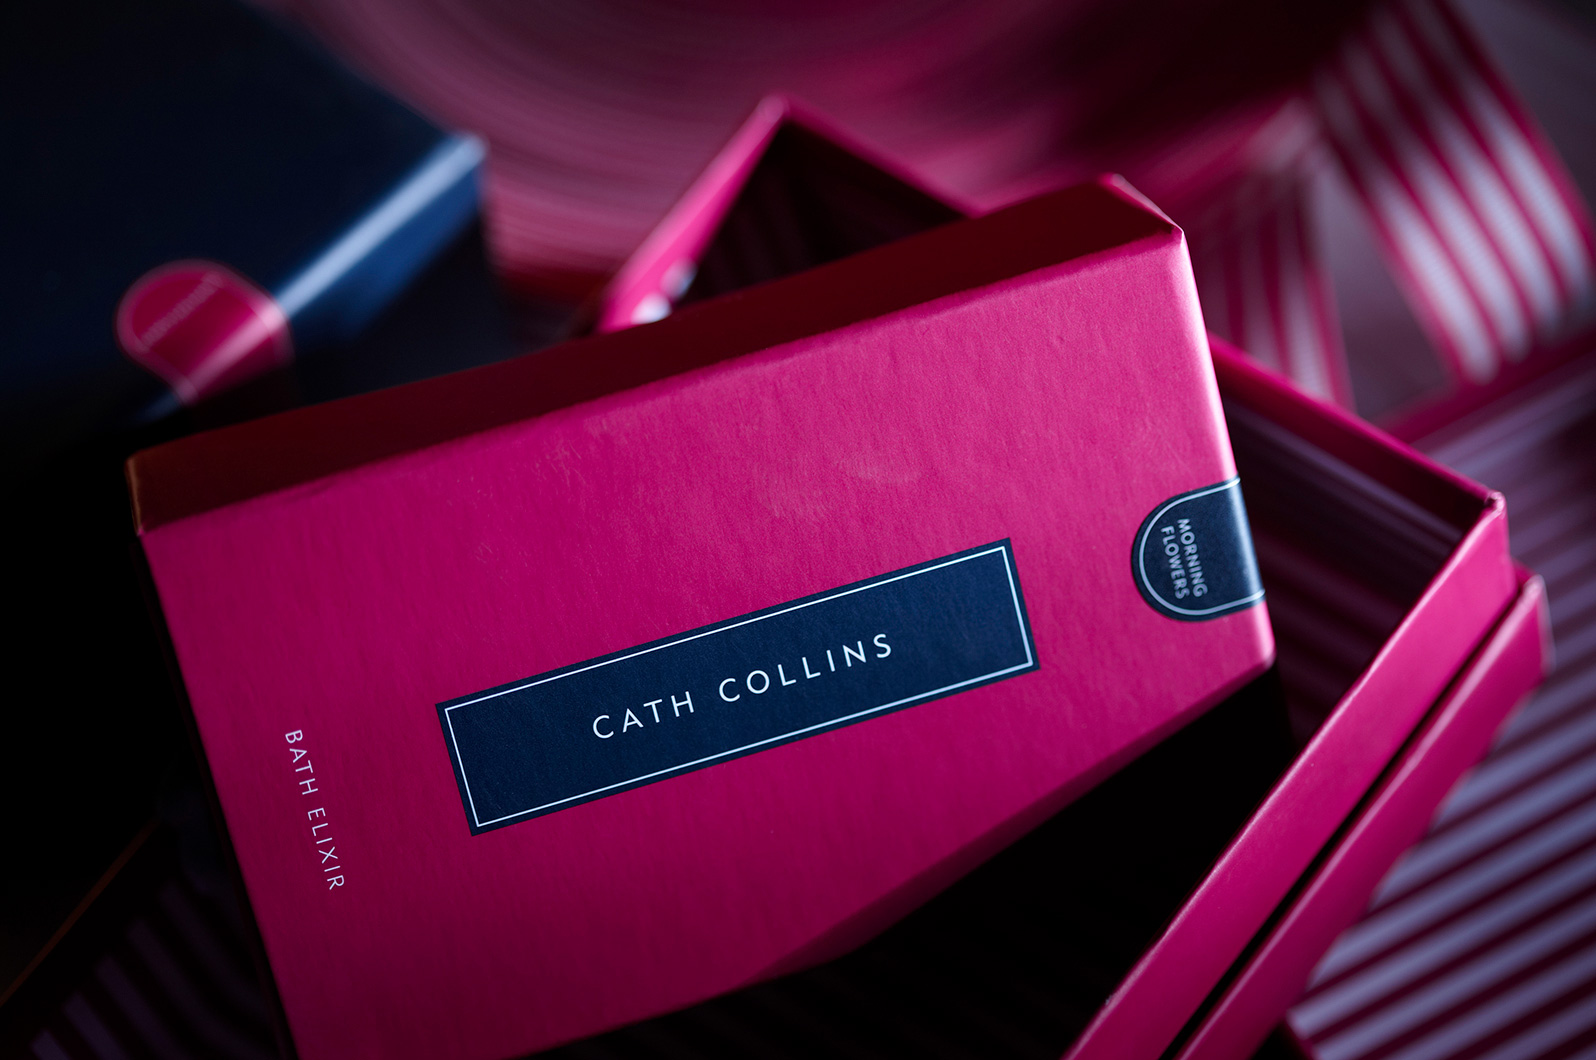 Colour and composition work together again here to highlight the quality of the packaging and gifting experience.